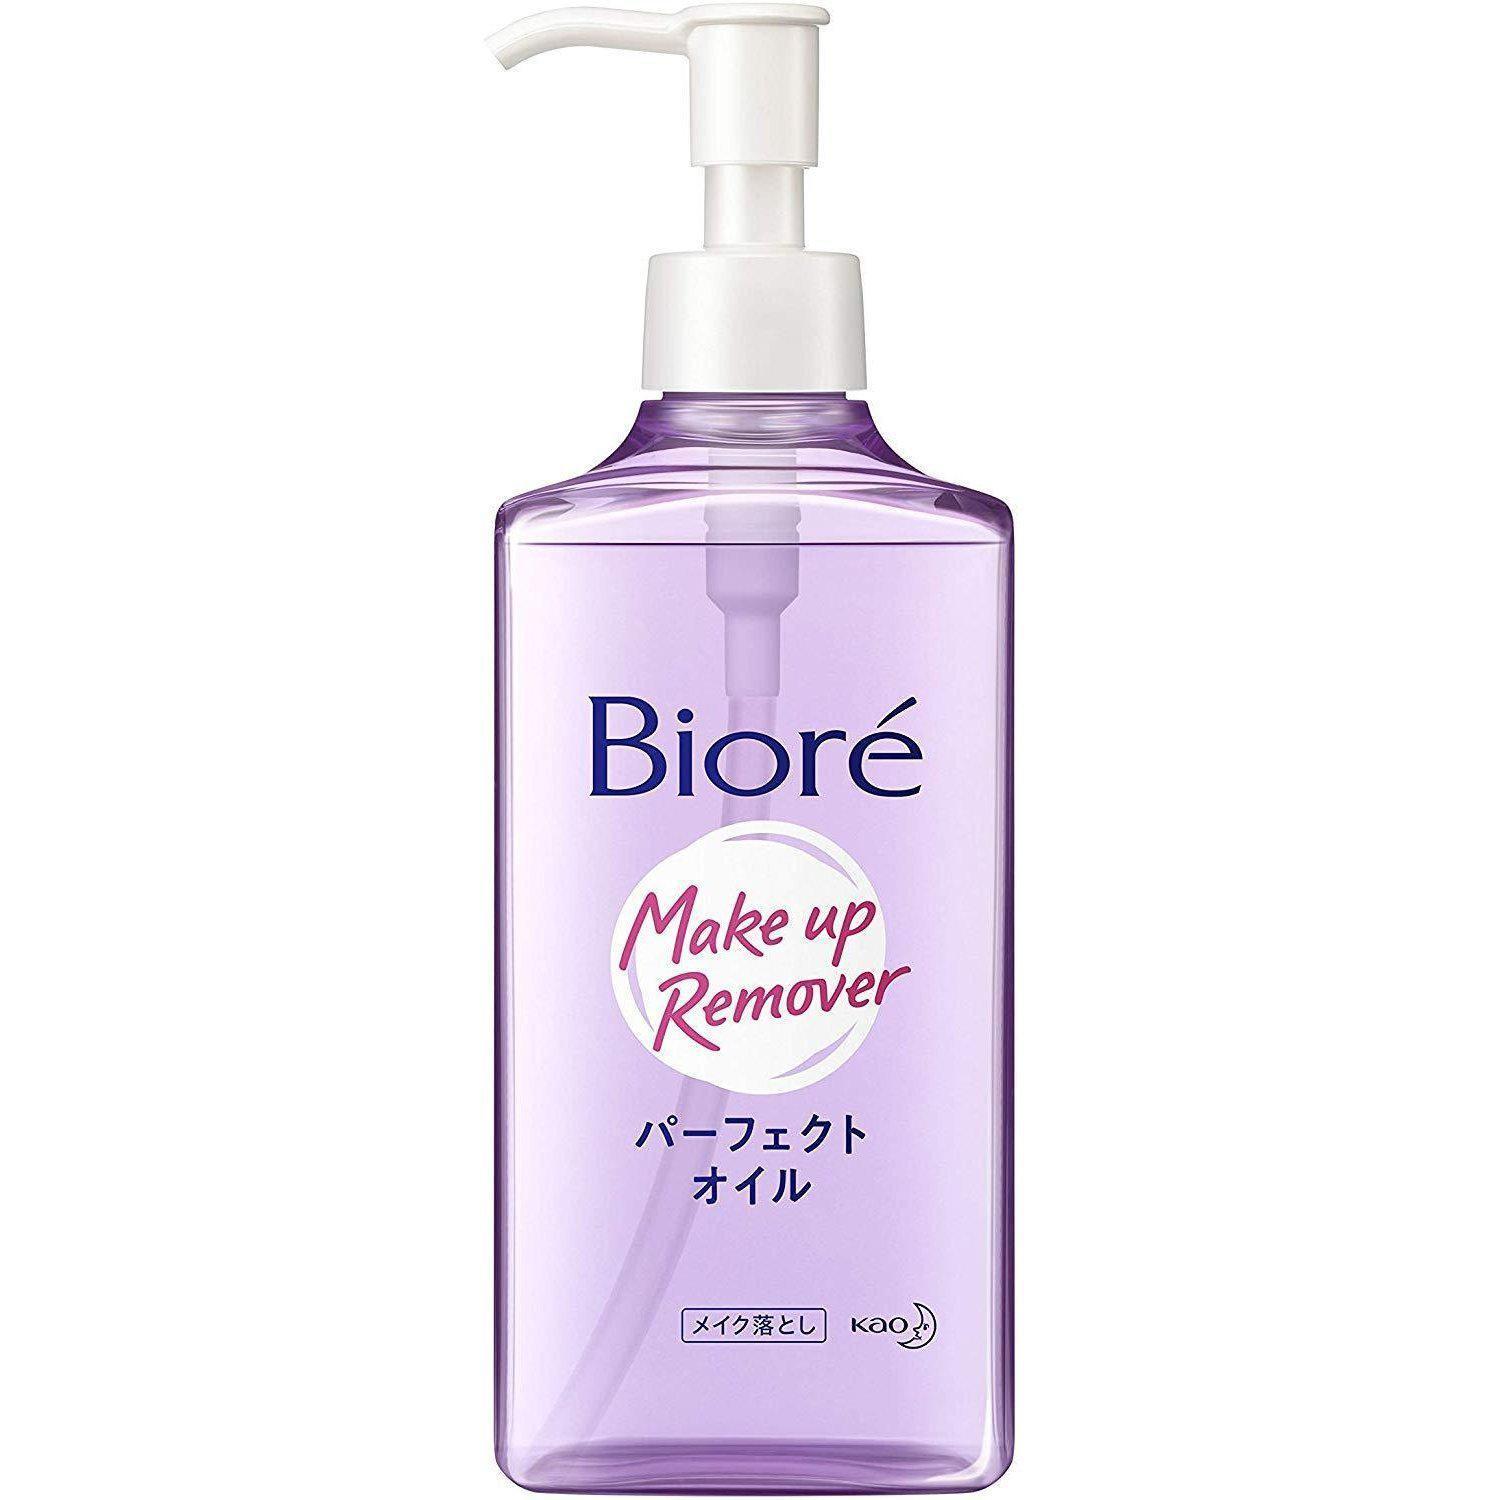 Kao Biore Makeup Remover Perfect Cleansing Oil 230ml, Japanese Taste